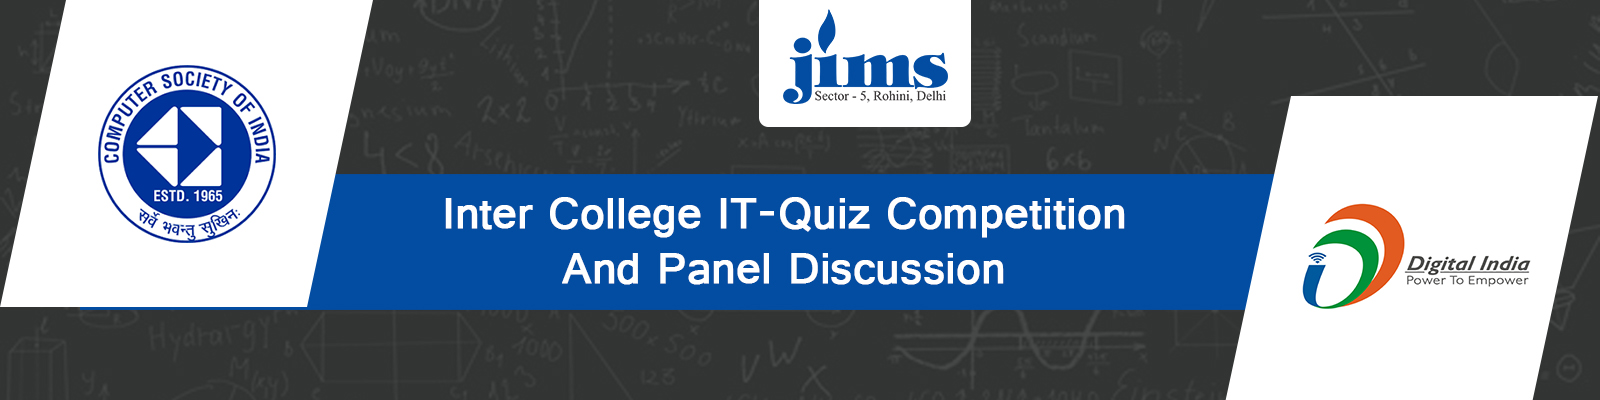 JIMS Inter College IT-Quiz Competition